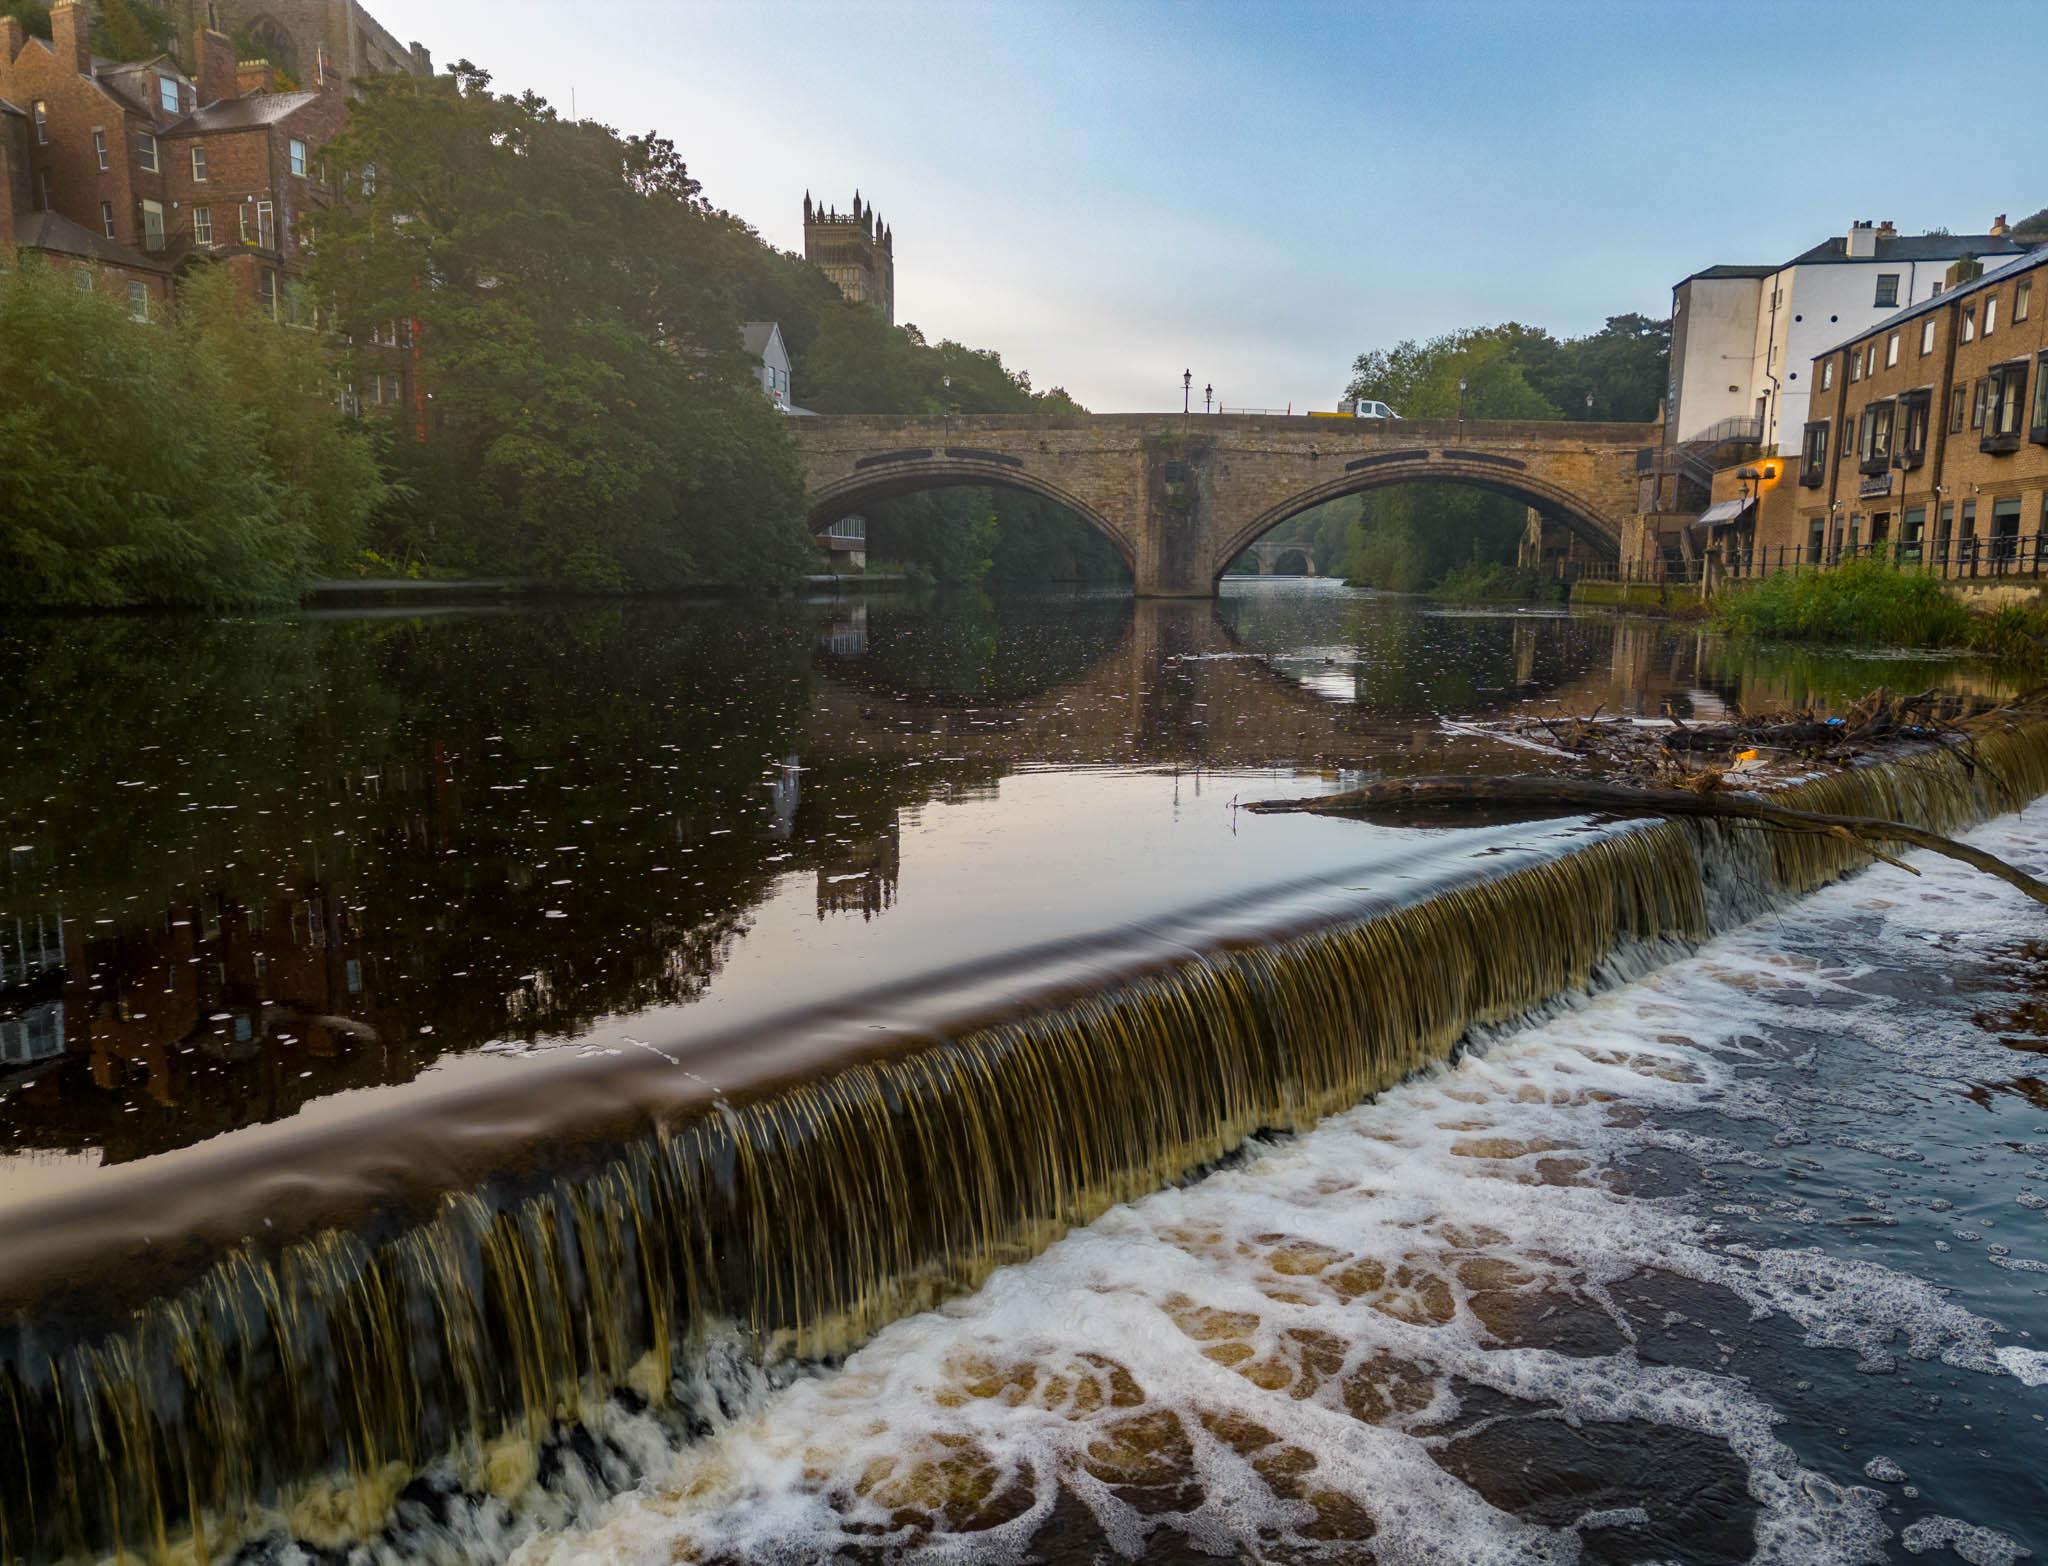 Low level drone shot if a weir in Durham, England